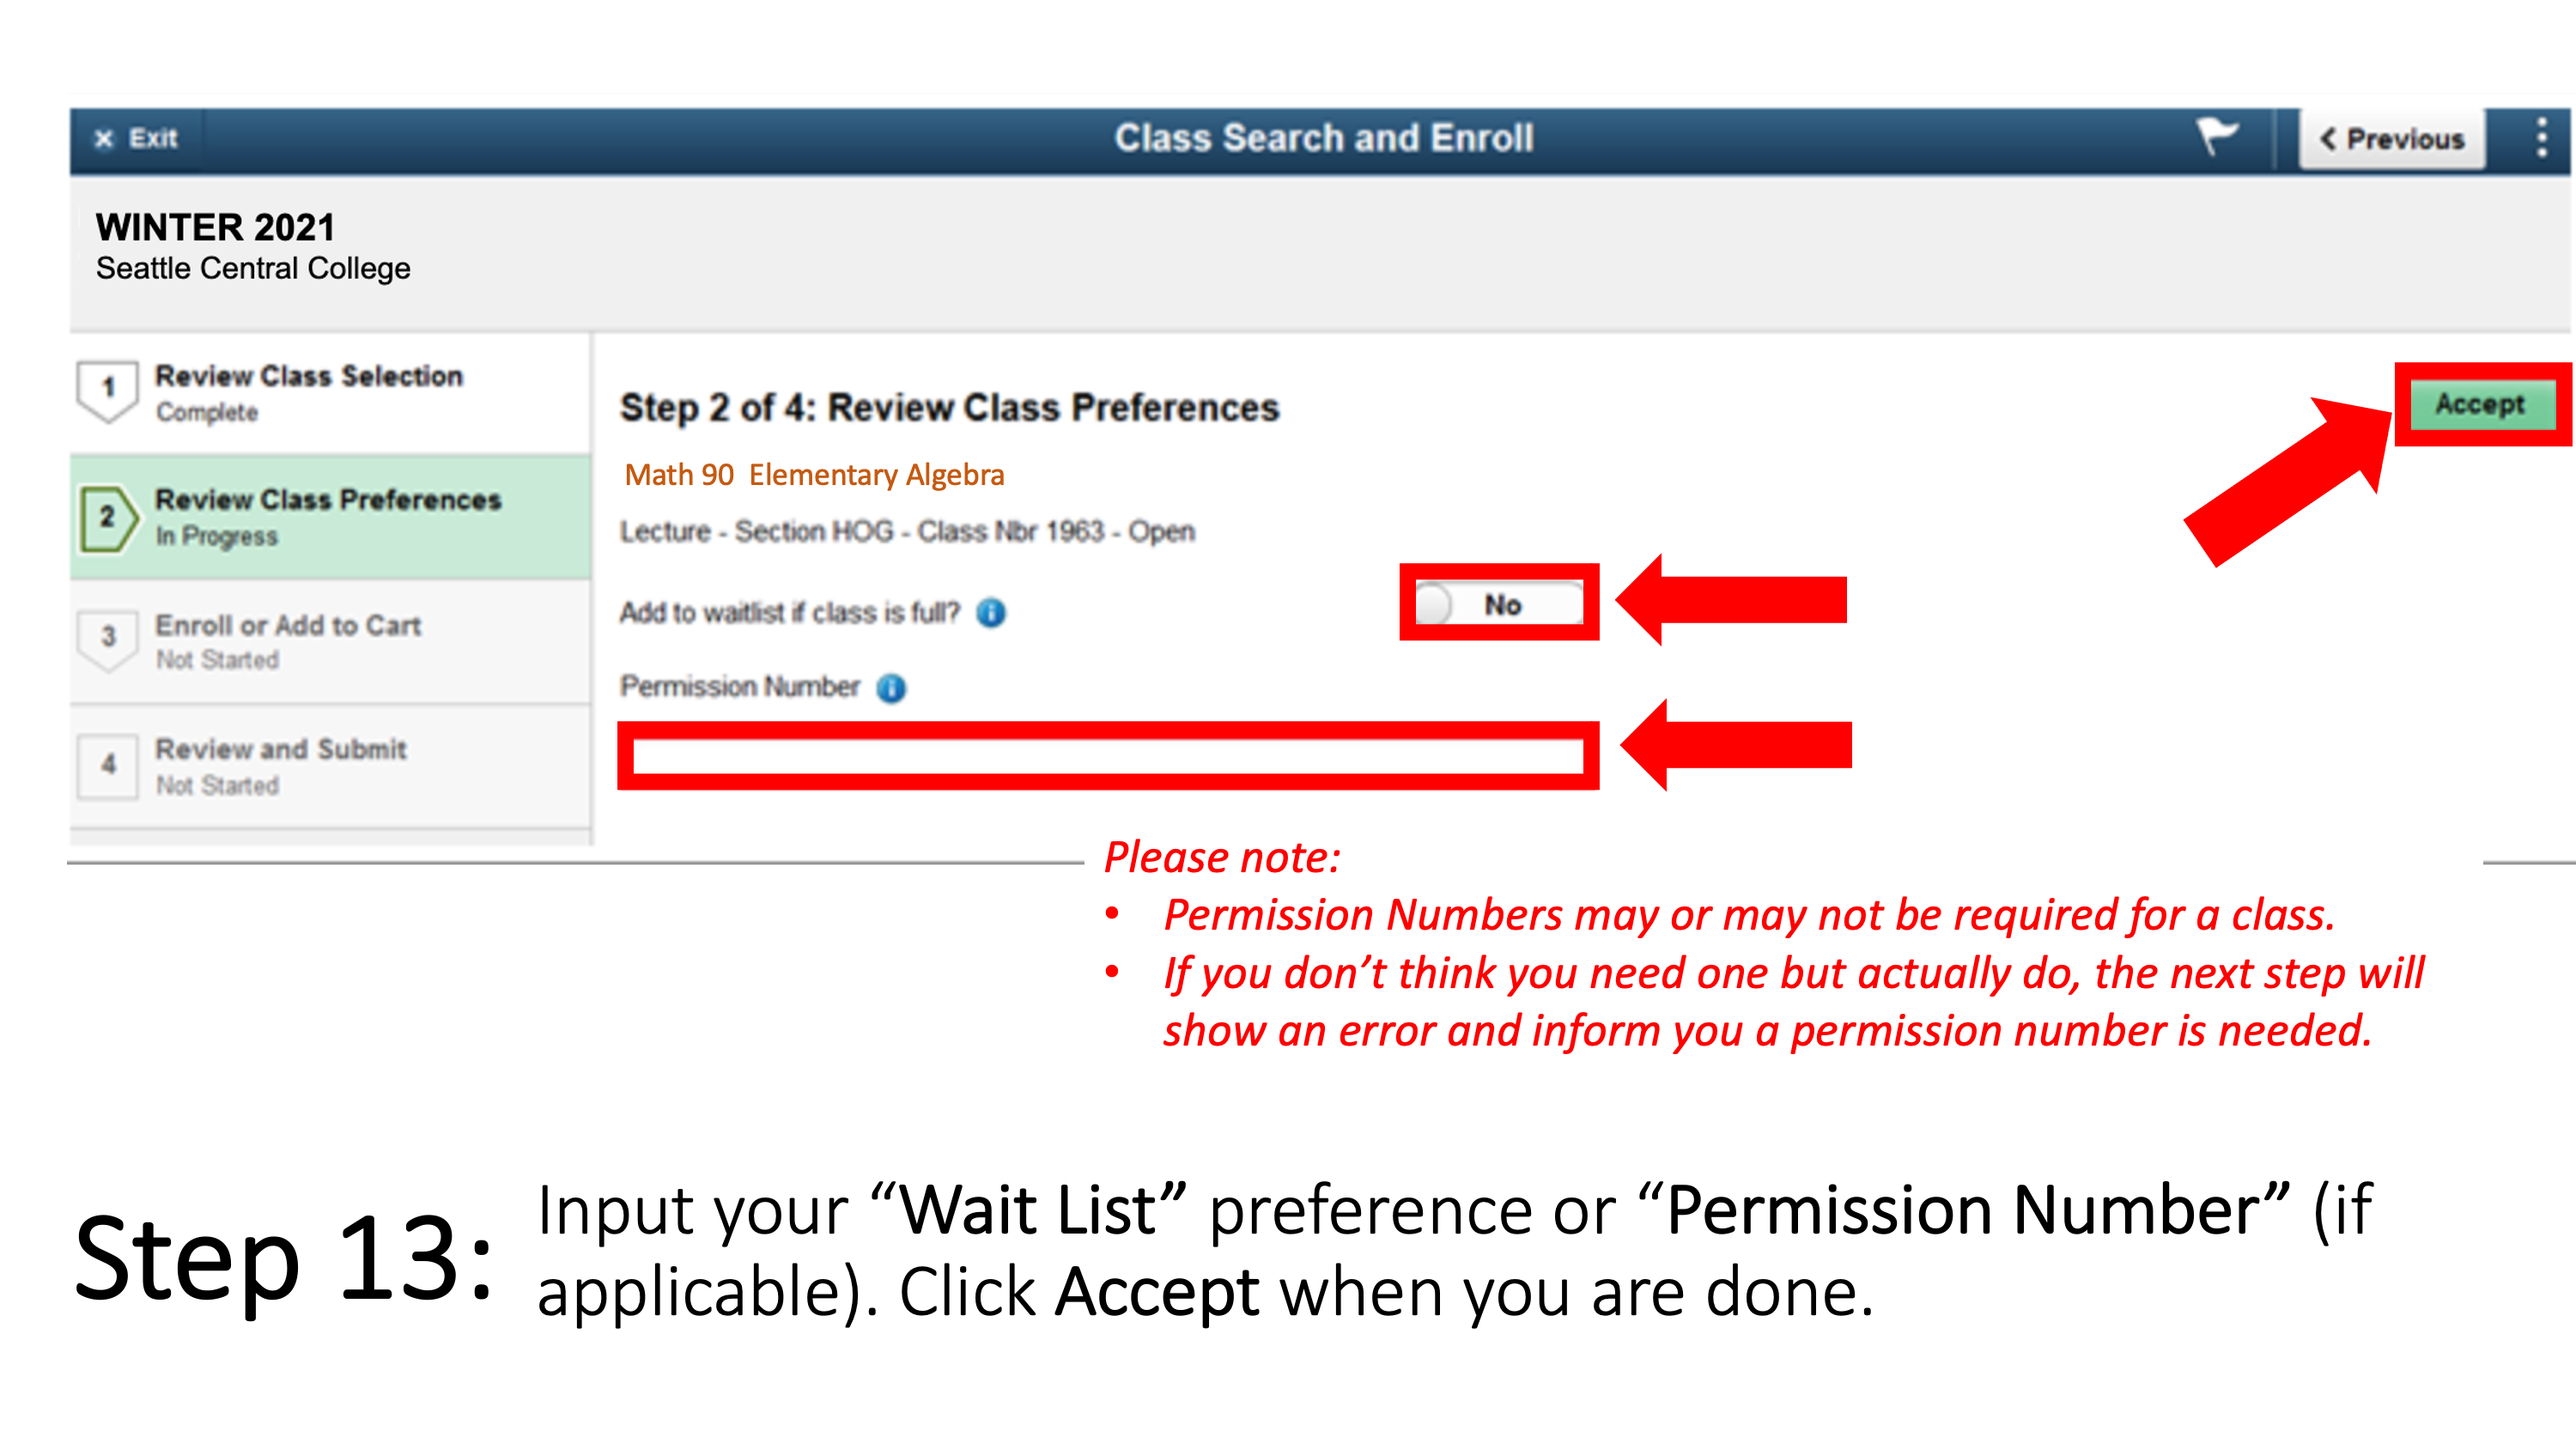 Step 13: Input your “Wait List” preference or “Permission Number” (if applicable). Click Accept when you are done. Please note: Permission Numbers may or may not be required for a class. If you don’t think you need one but actually do, the next step will show an error and inform you a permission number is needed.